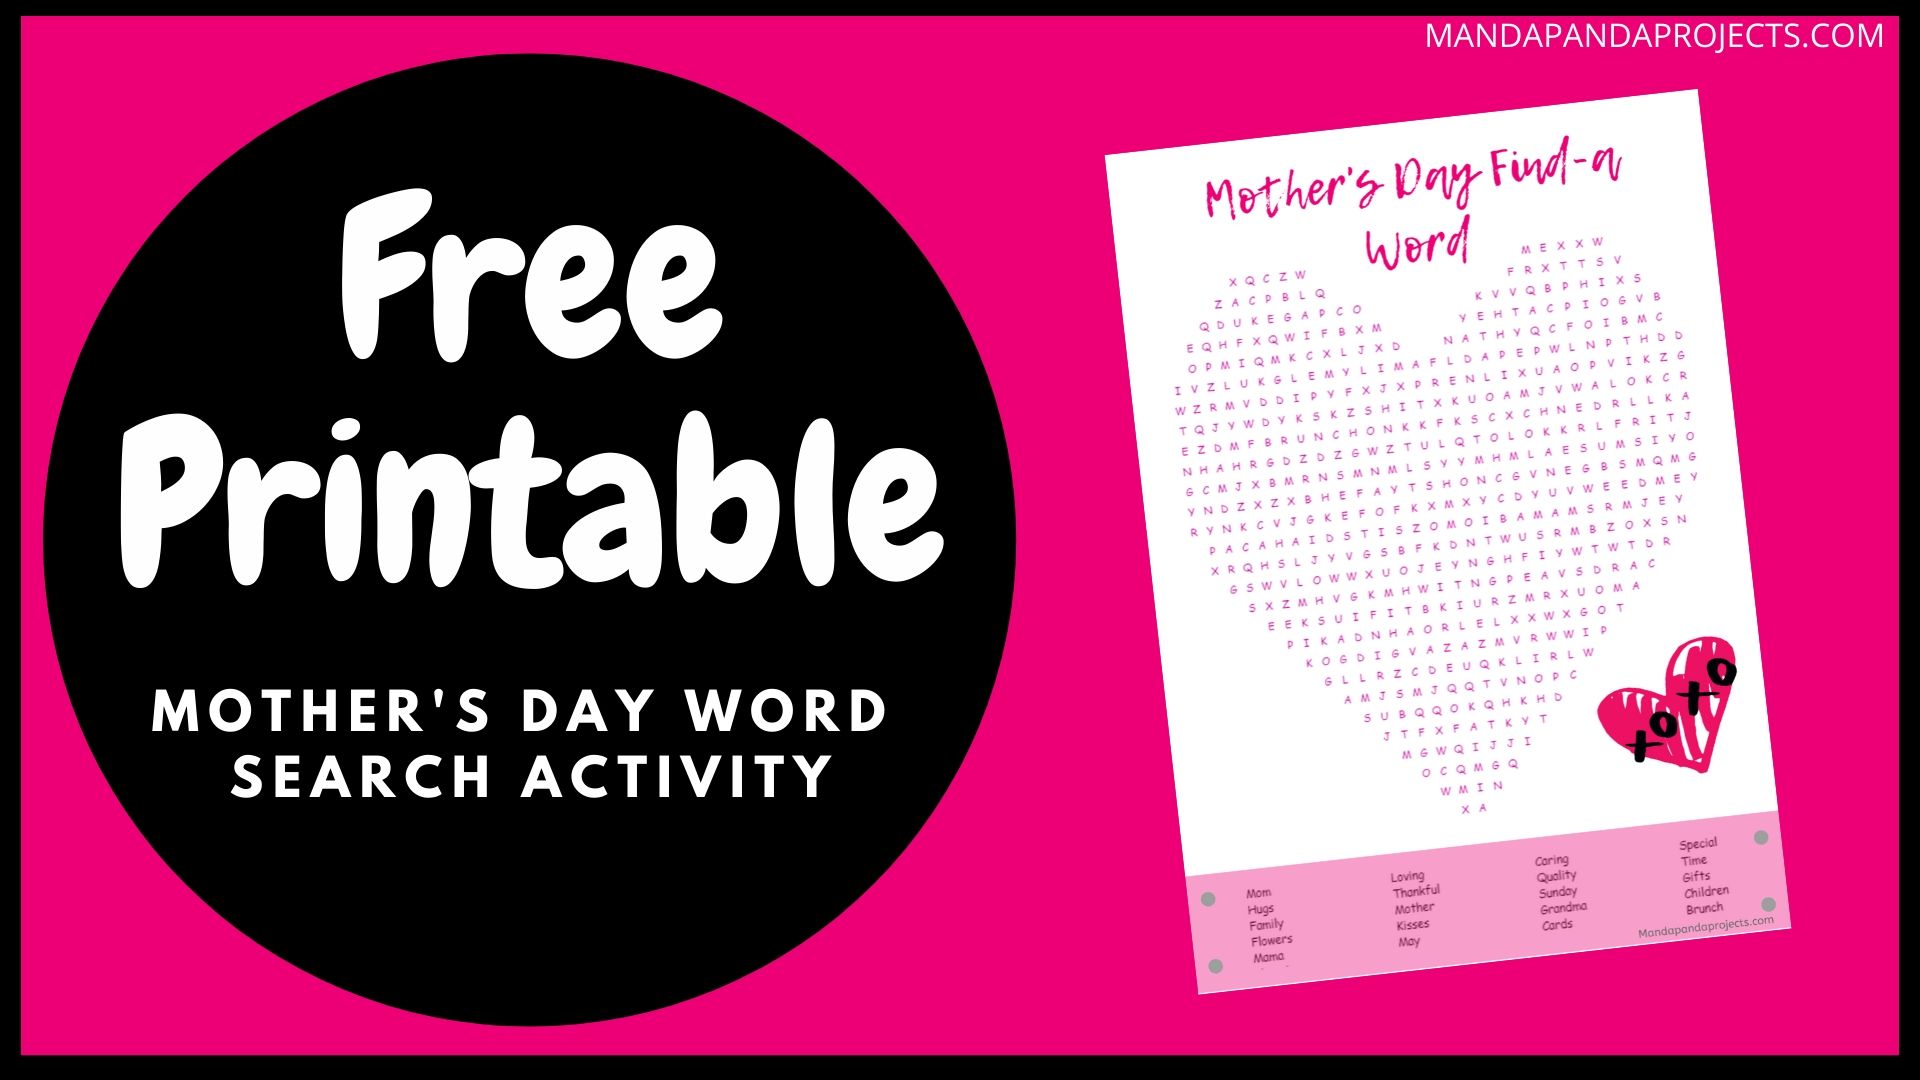 Free printable mother's day word search activity for kids